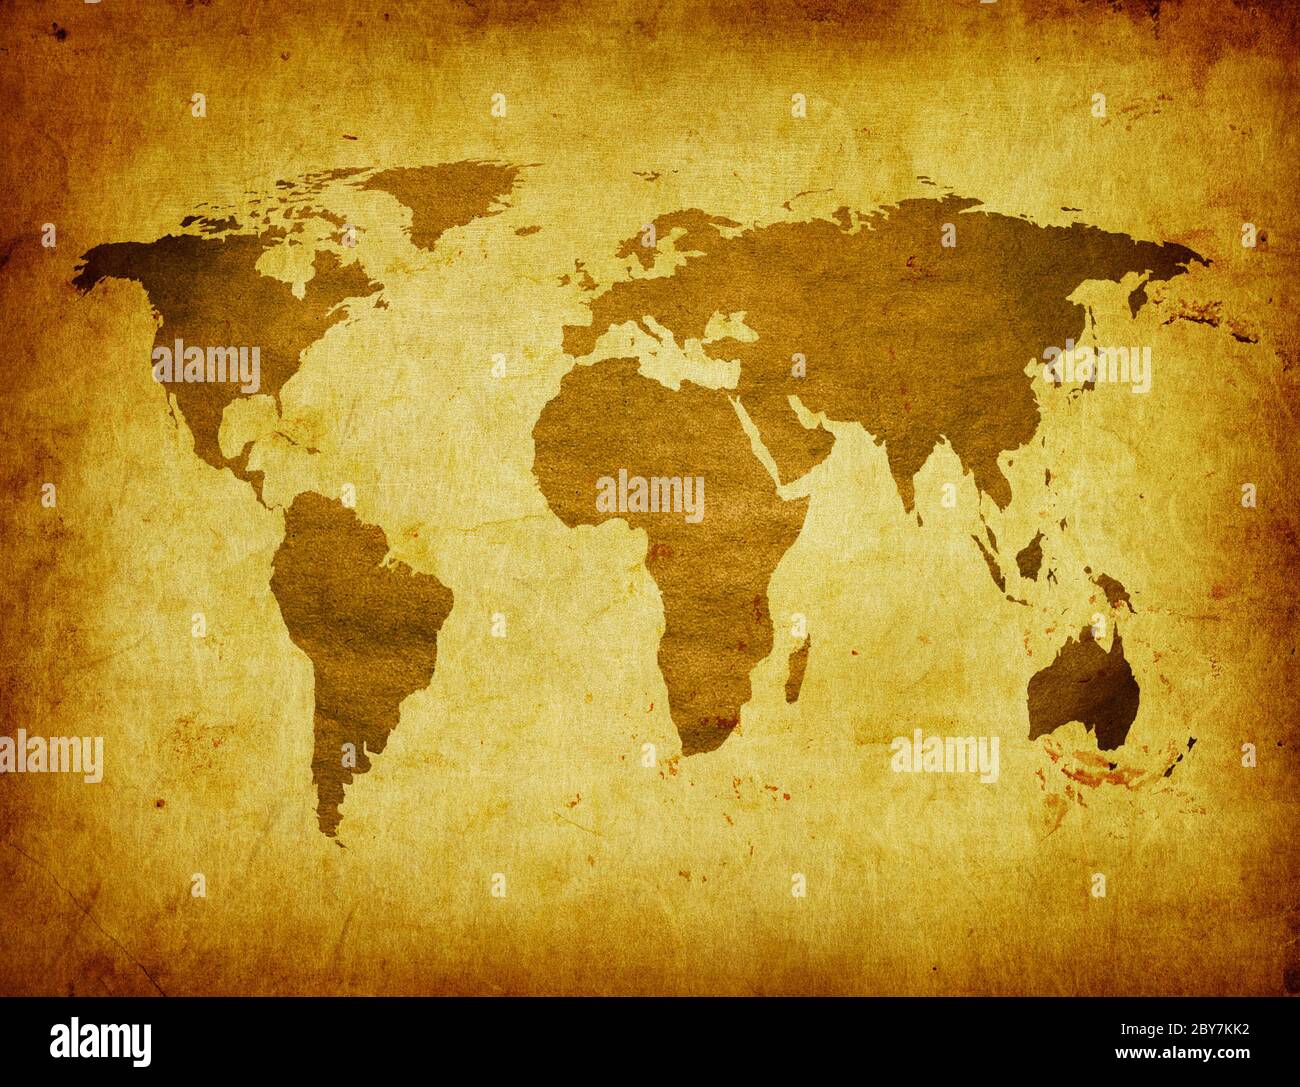 ancient map of the world Stock Photo - Alamy